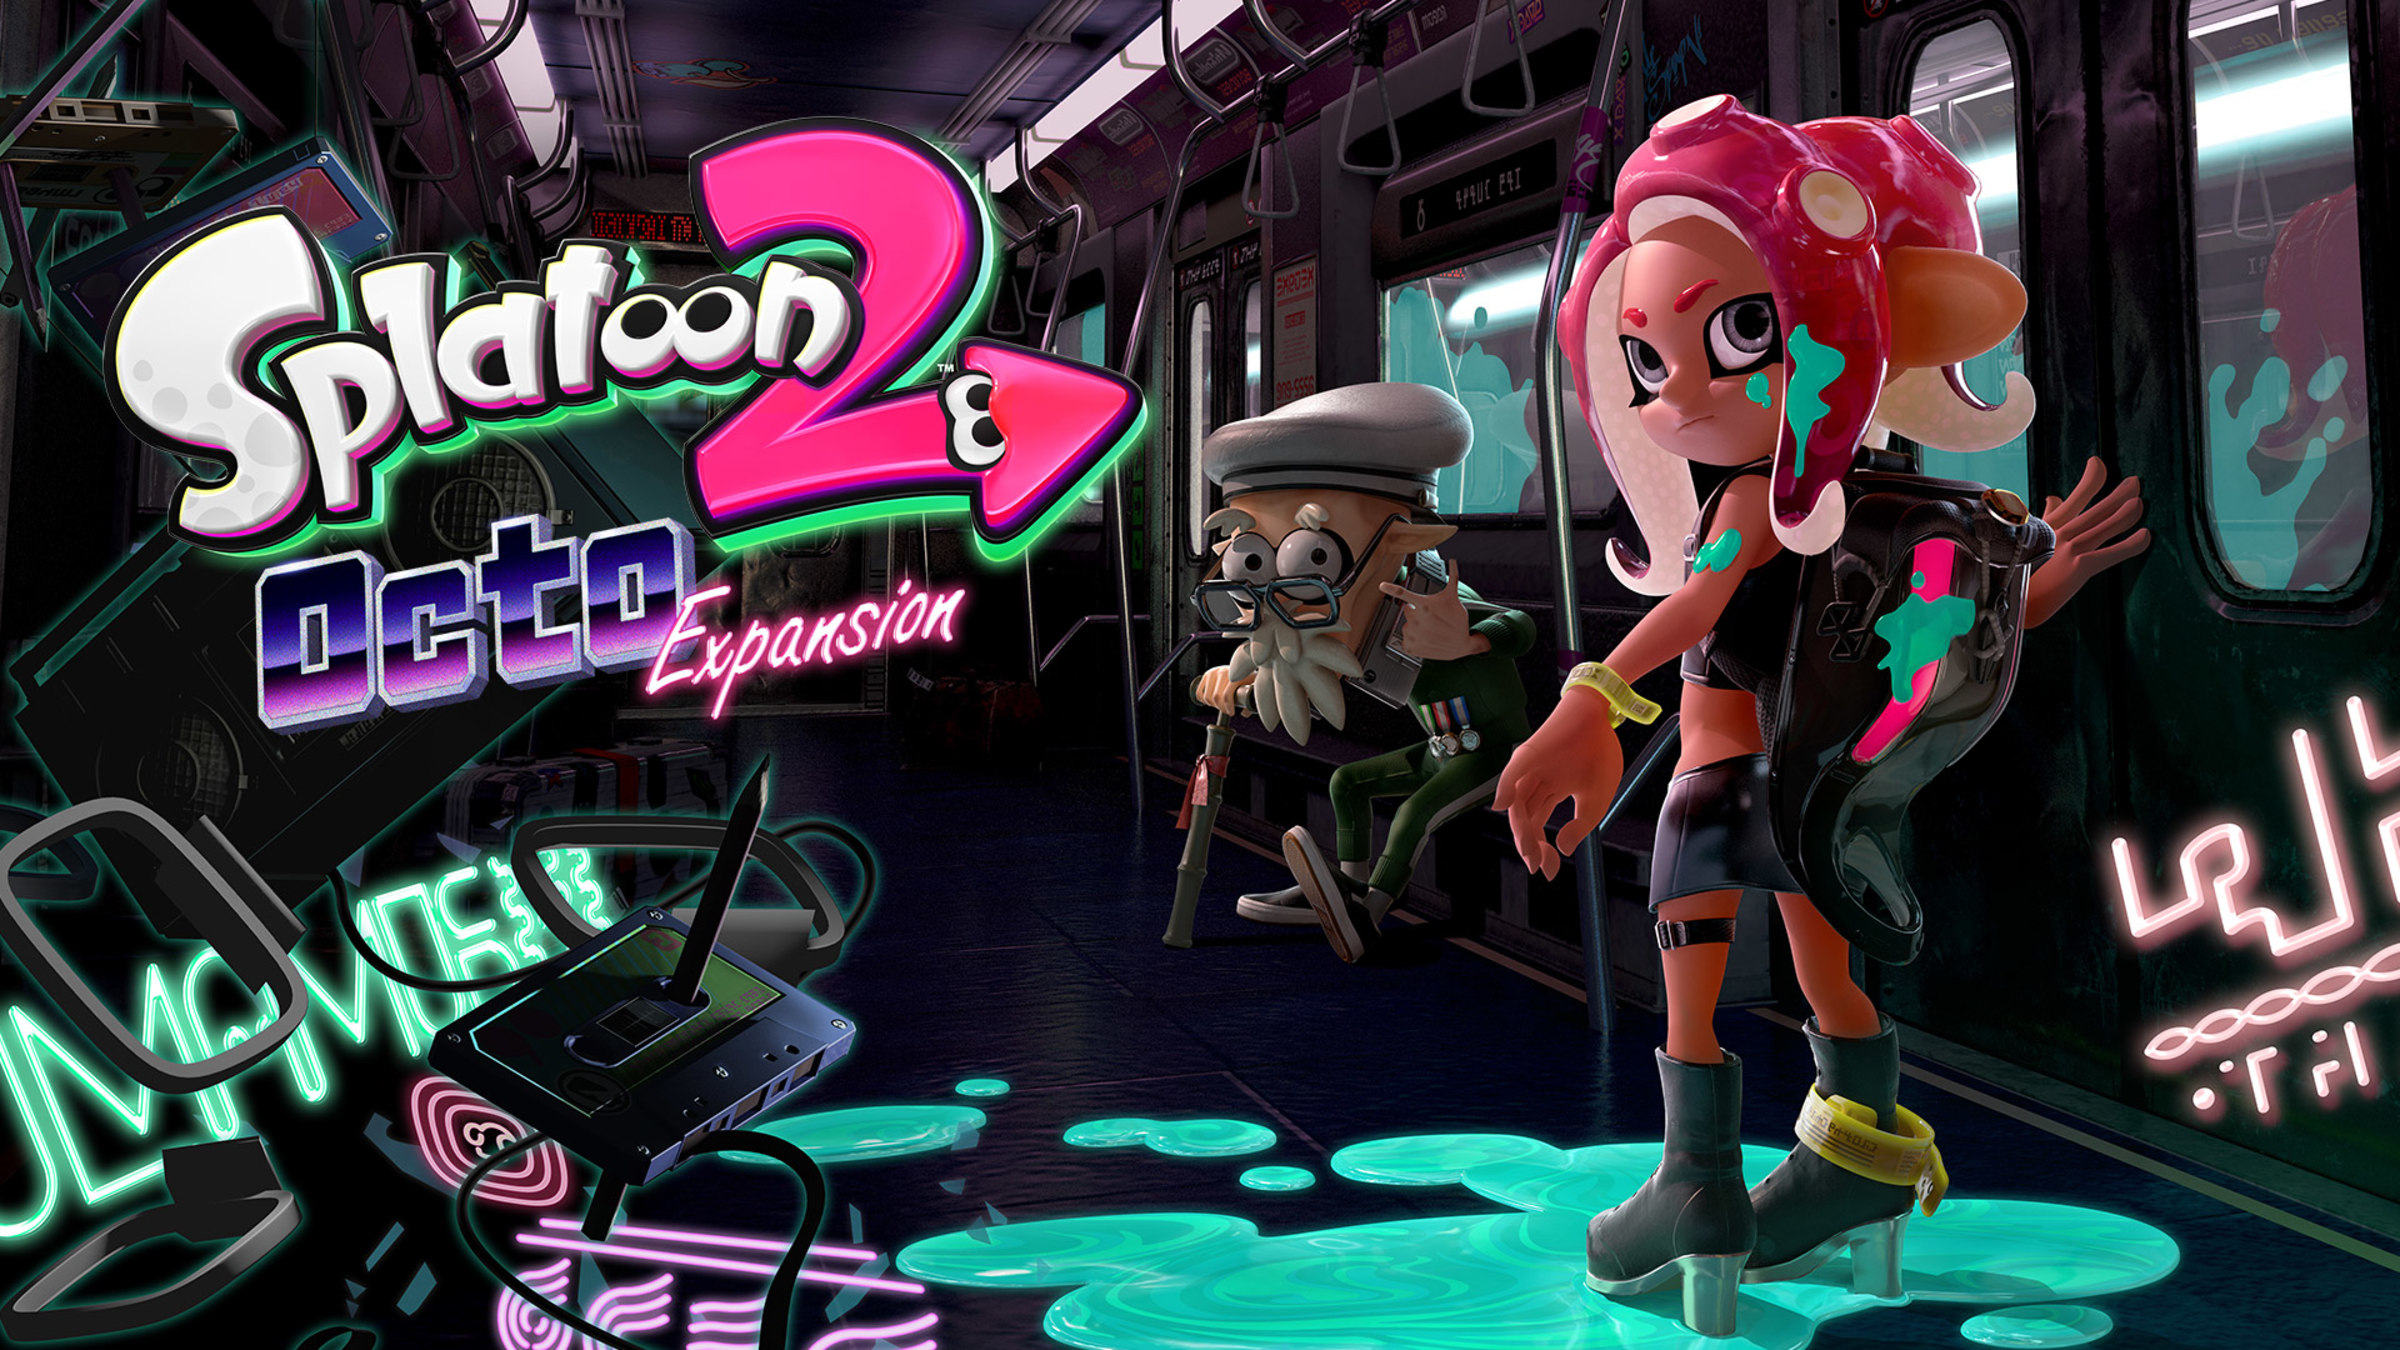 Splatoon™ 2: - Octo Switch Nintendo for Site Nintendo Expansion Official